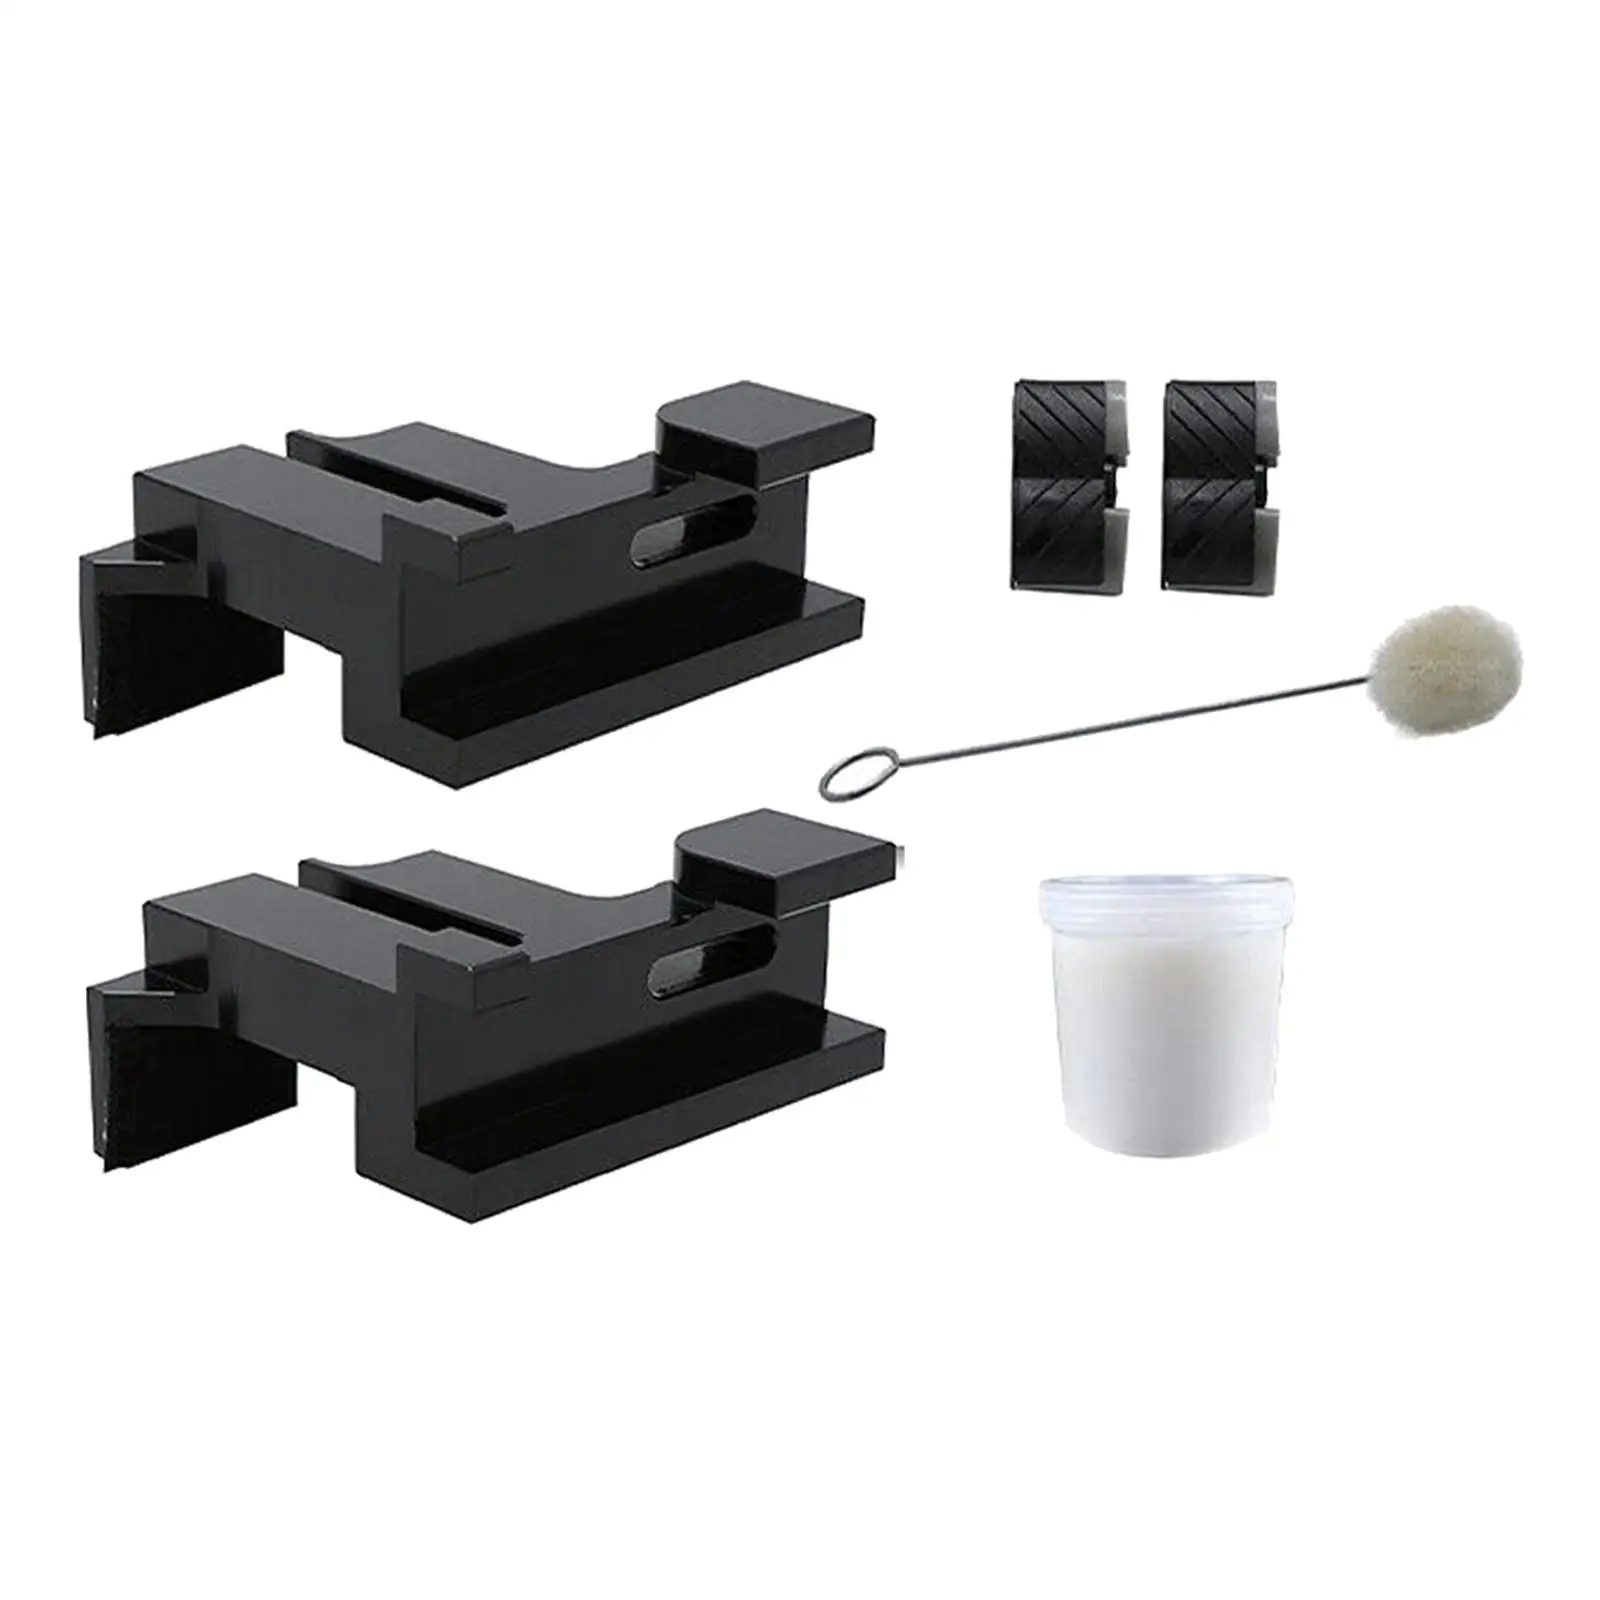 Sunroof Track Assembly Repair Set Replaces Part for Lincoln Mkx (2007-2015)